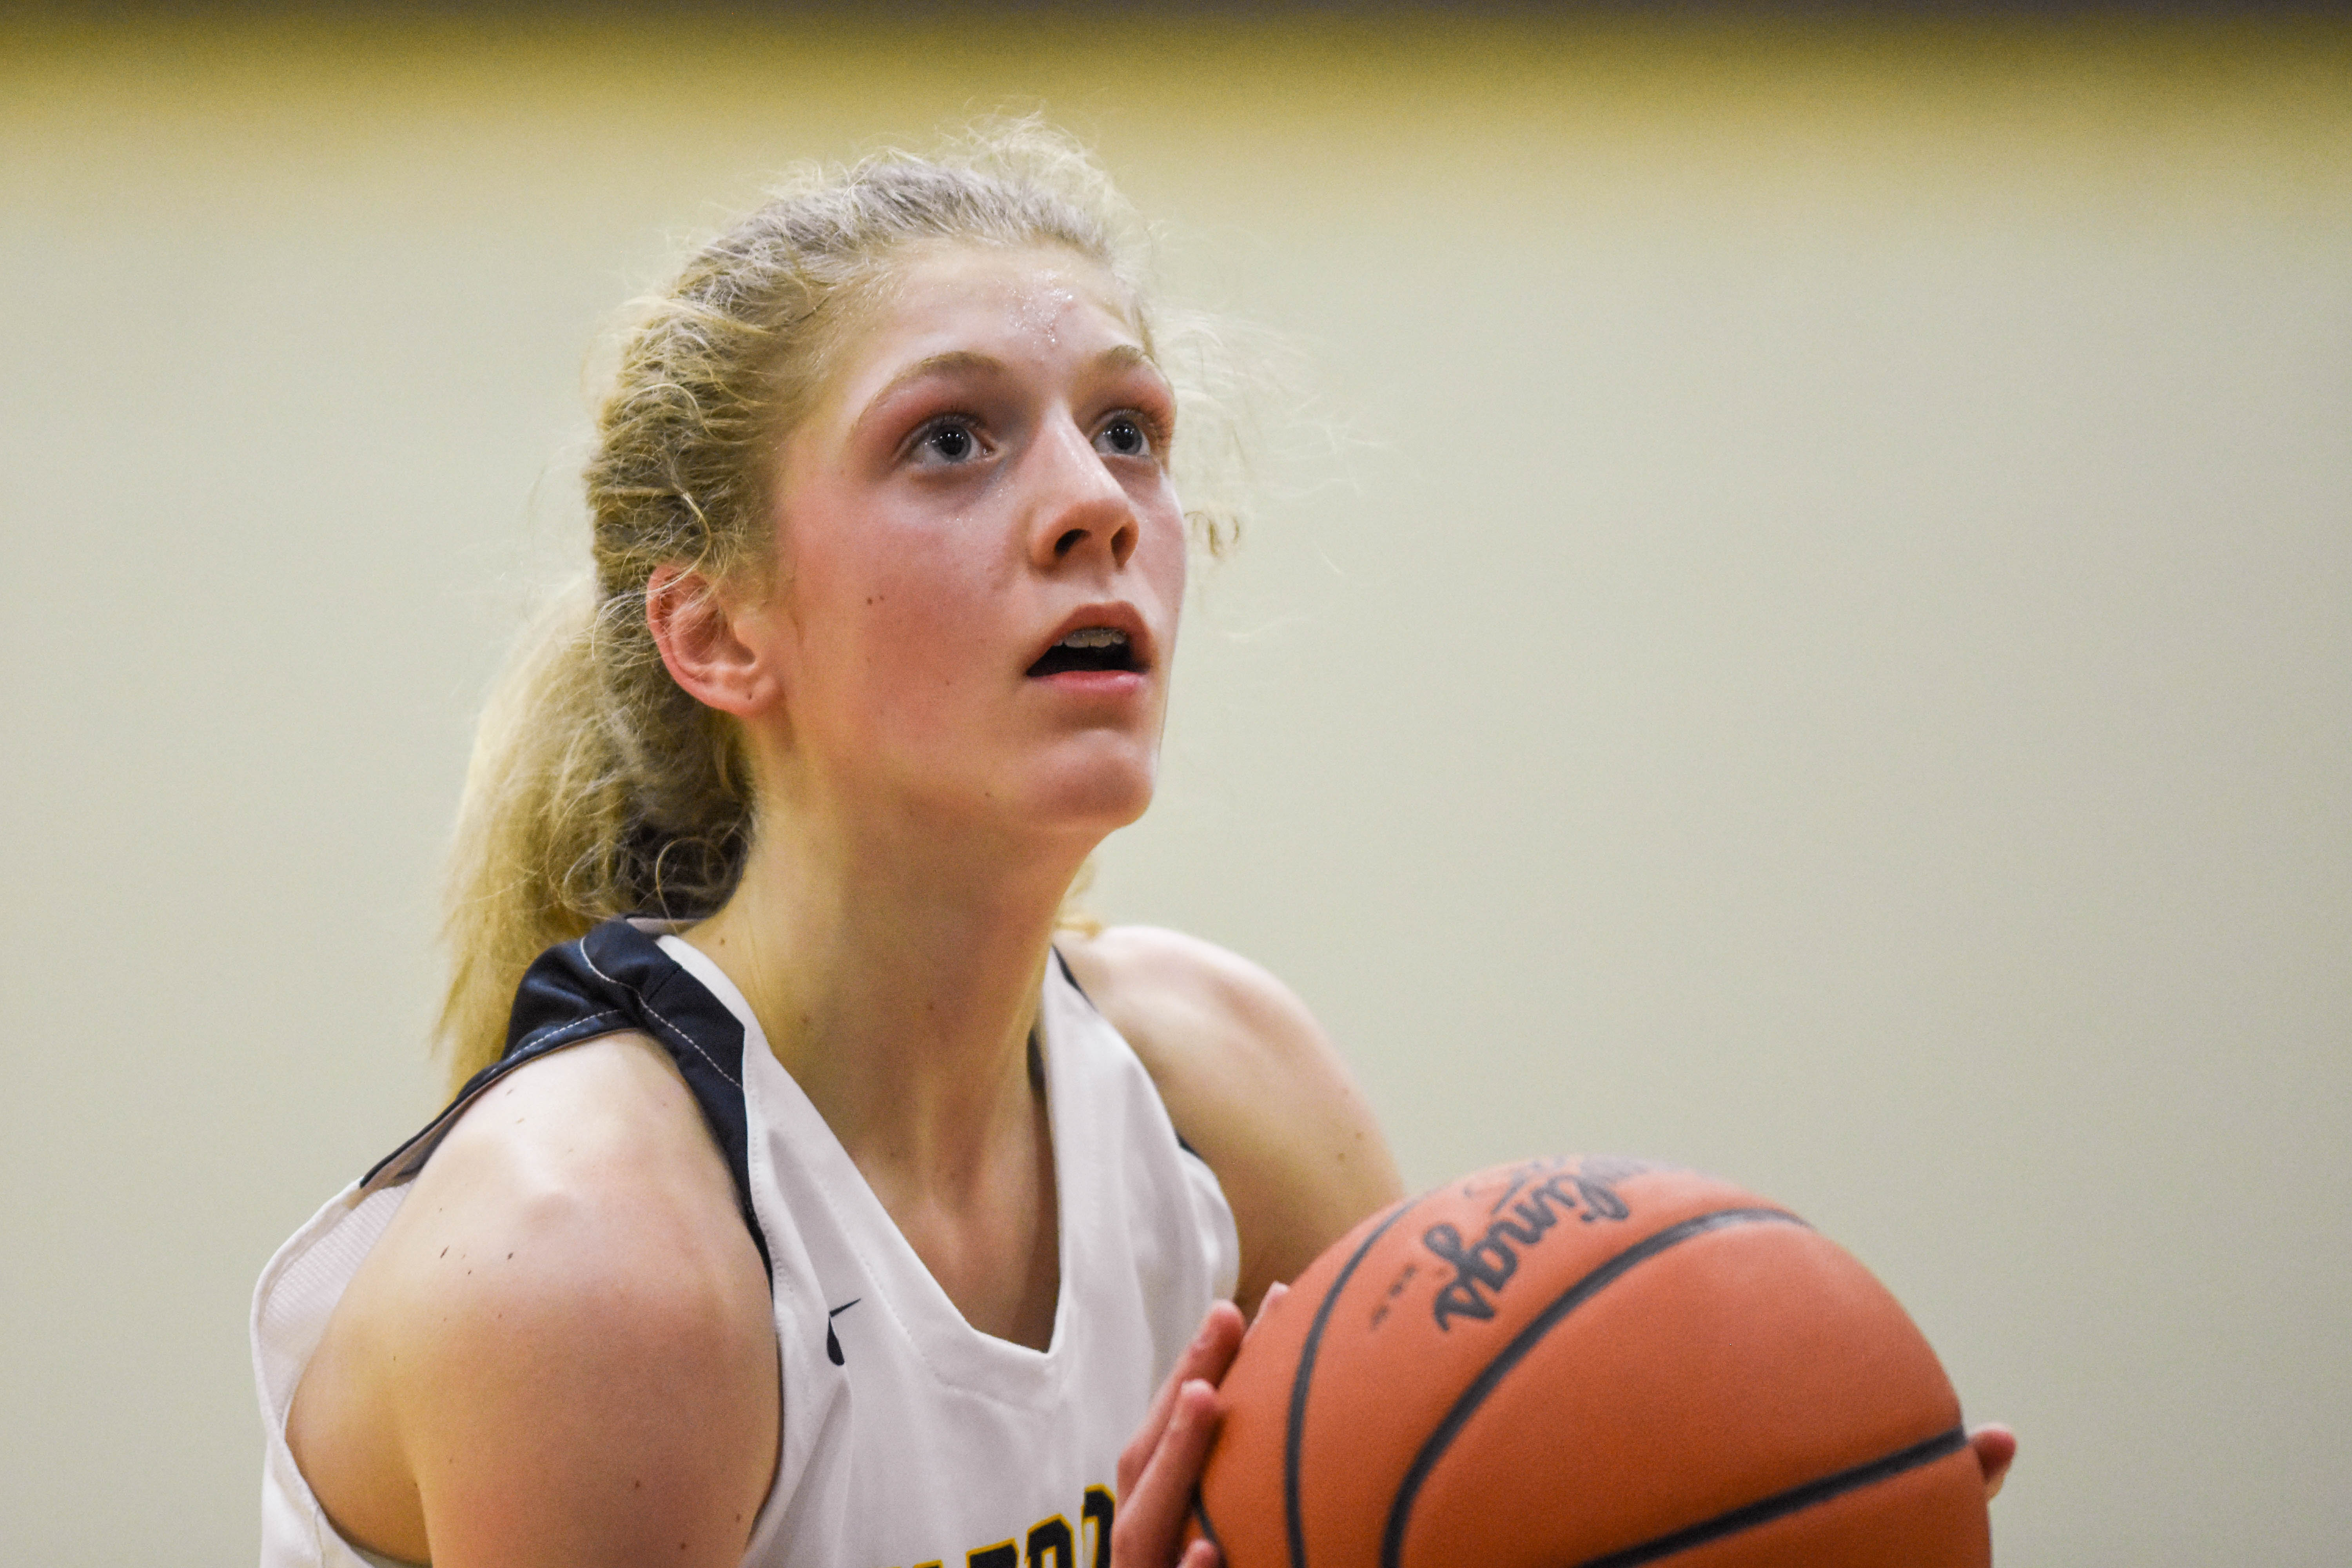 Grass Lake's Lexus Bargesser picks up Big 12, ACC and Big East offers -  mlive.com